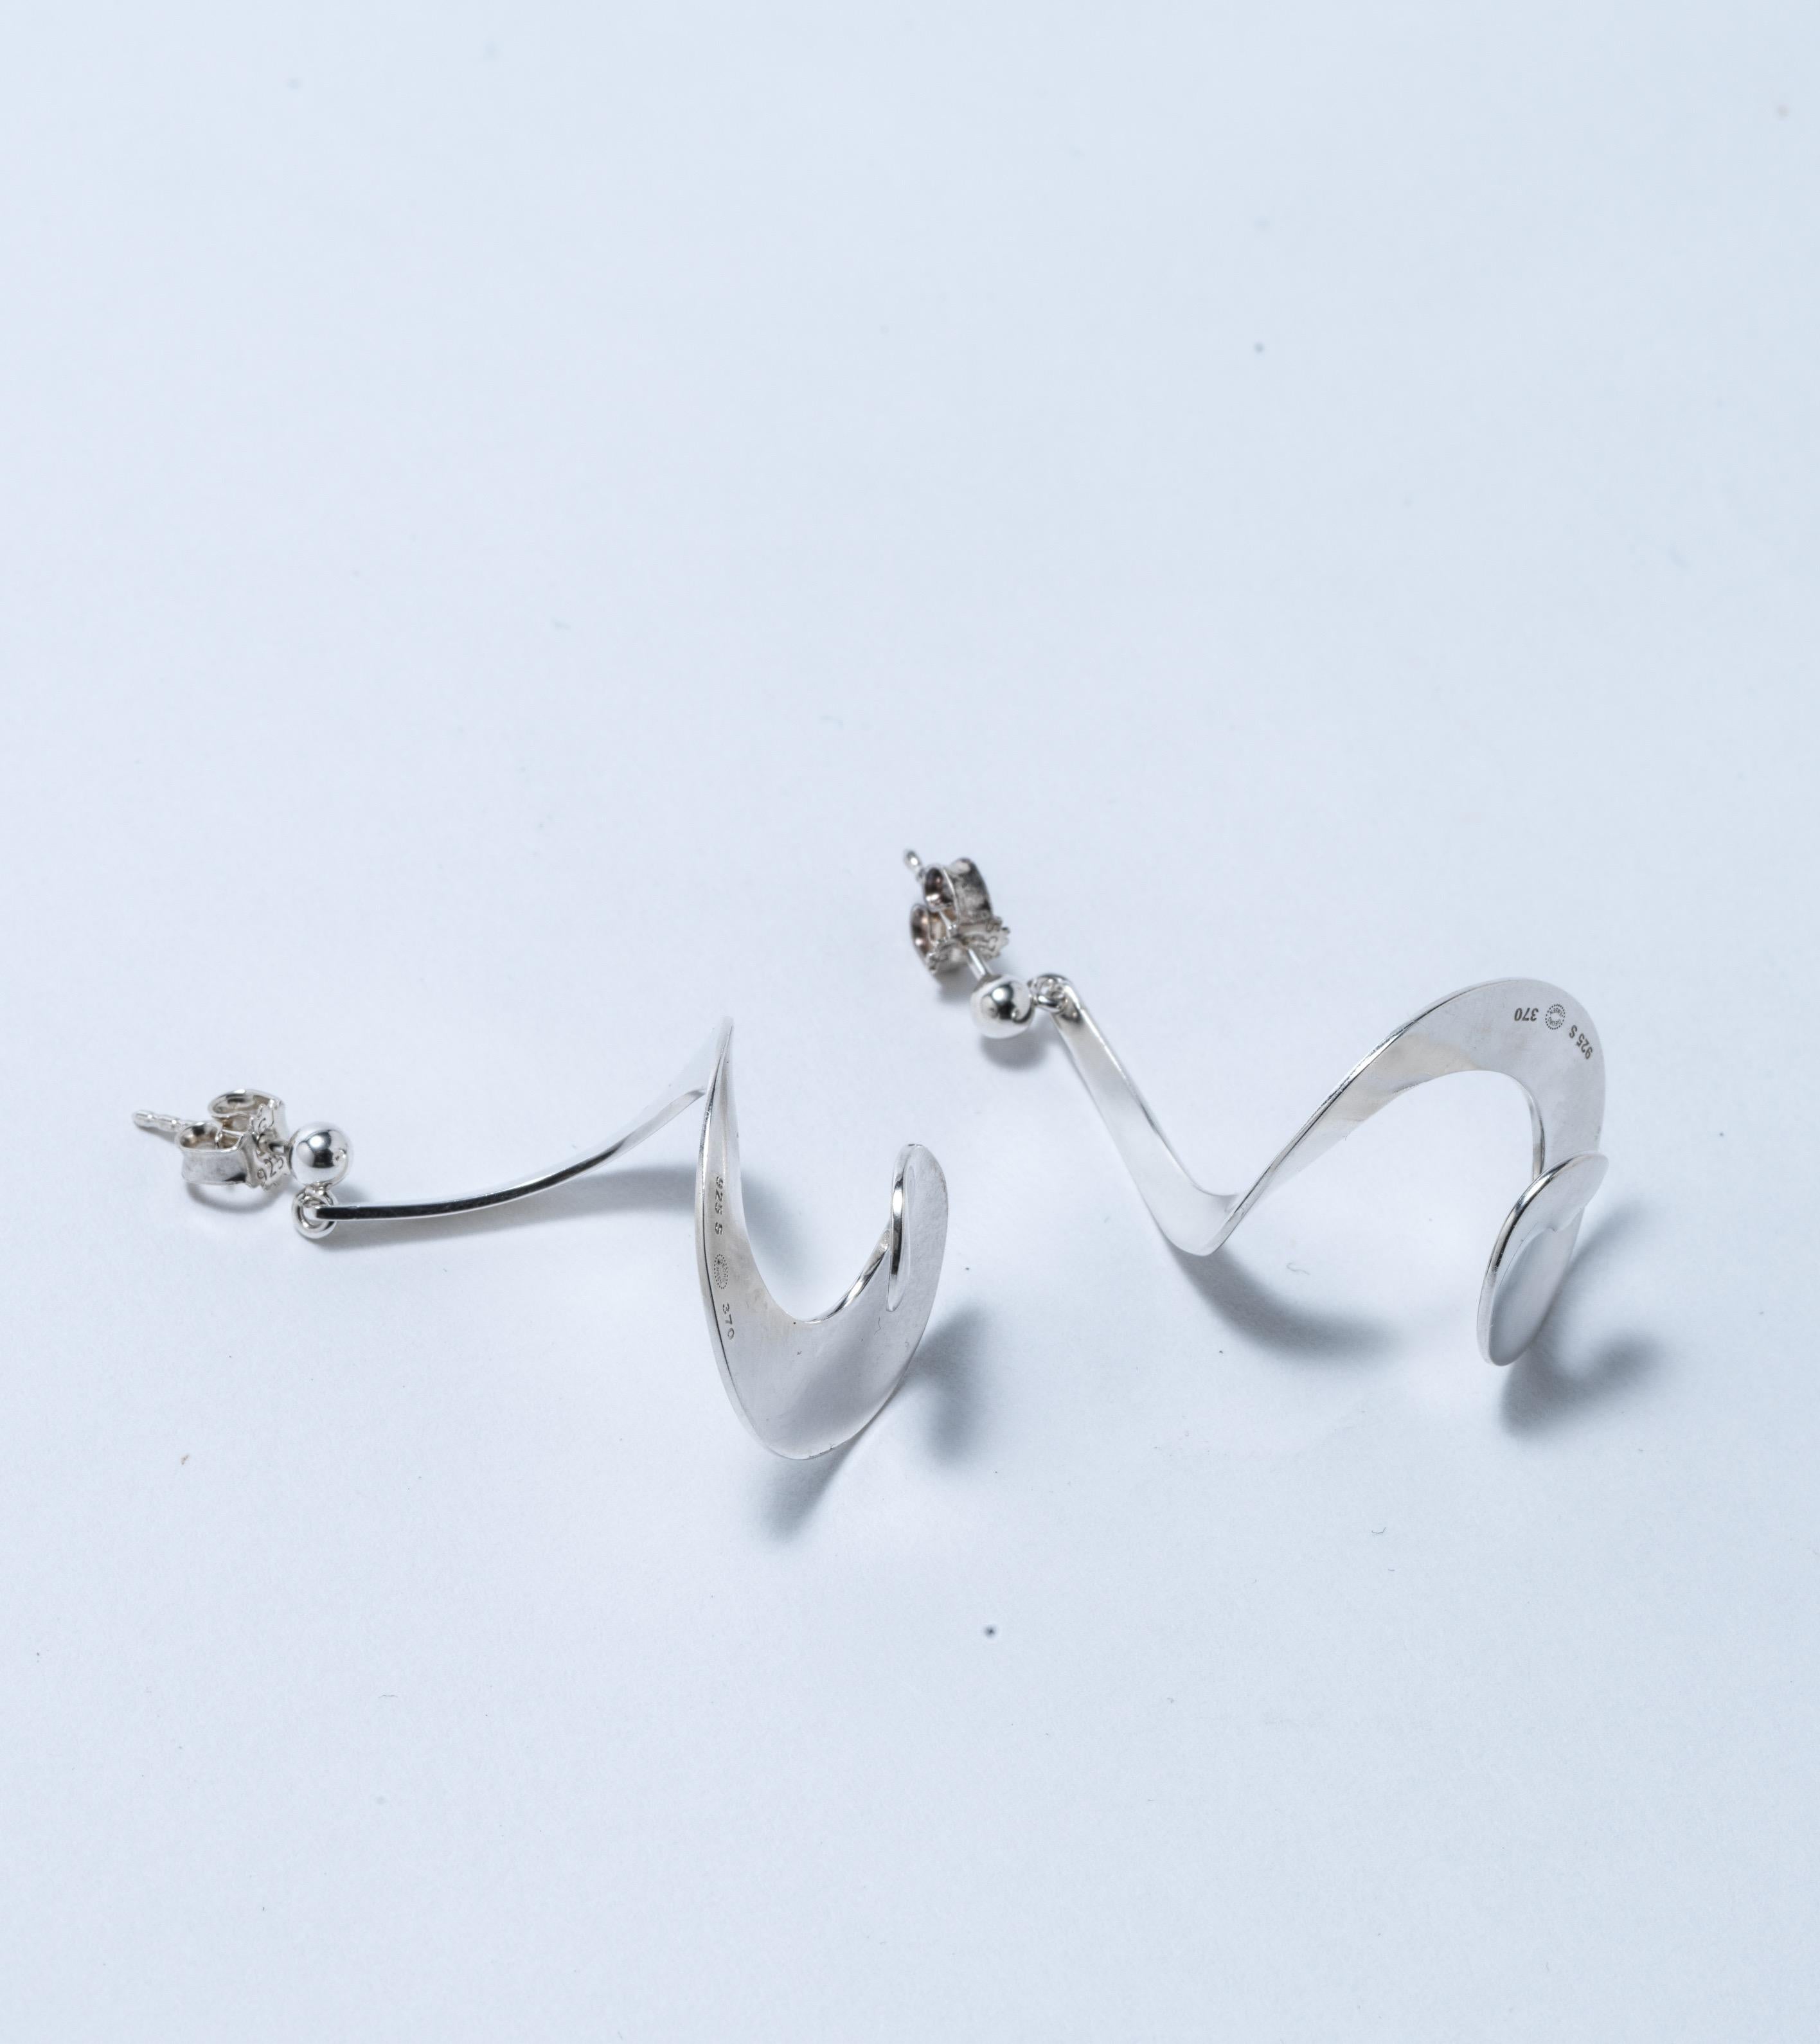 A pair of earrings. "Mobius",  designed by Vivianna Torun for Georg Jensen.  For Sale